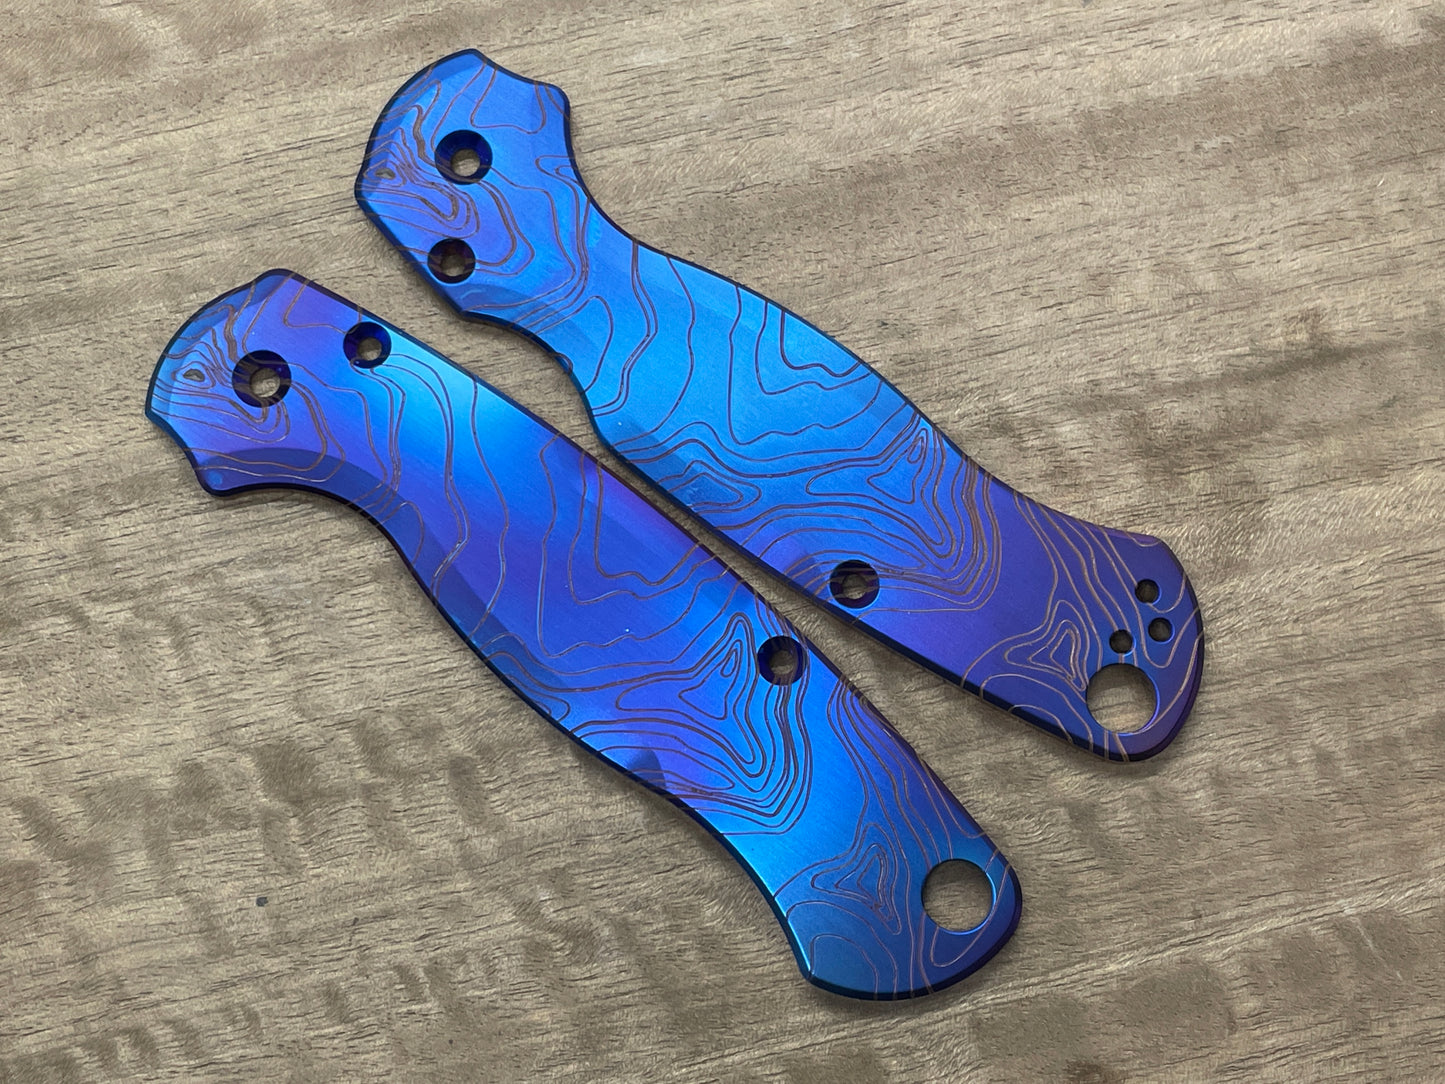 Flamed TOPO Engraved Titanium scales for Spyderco Paramilitary 2 PM2